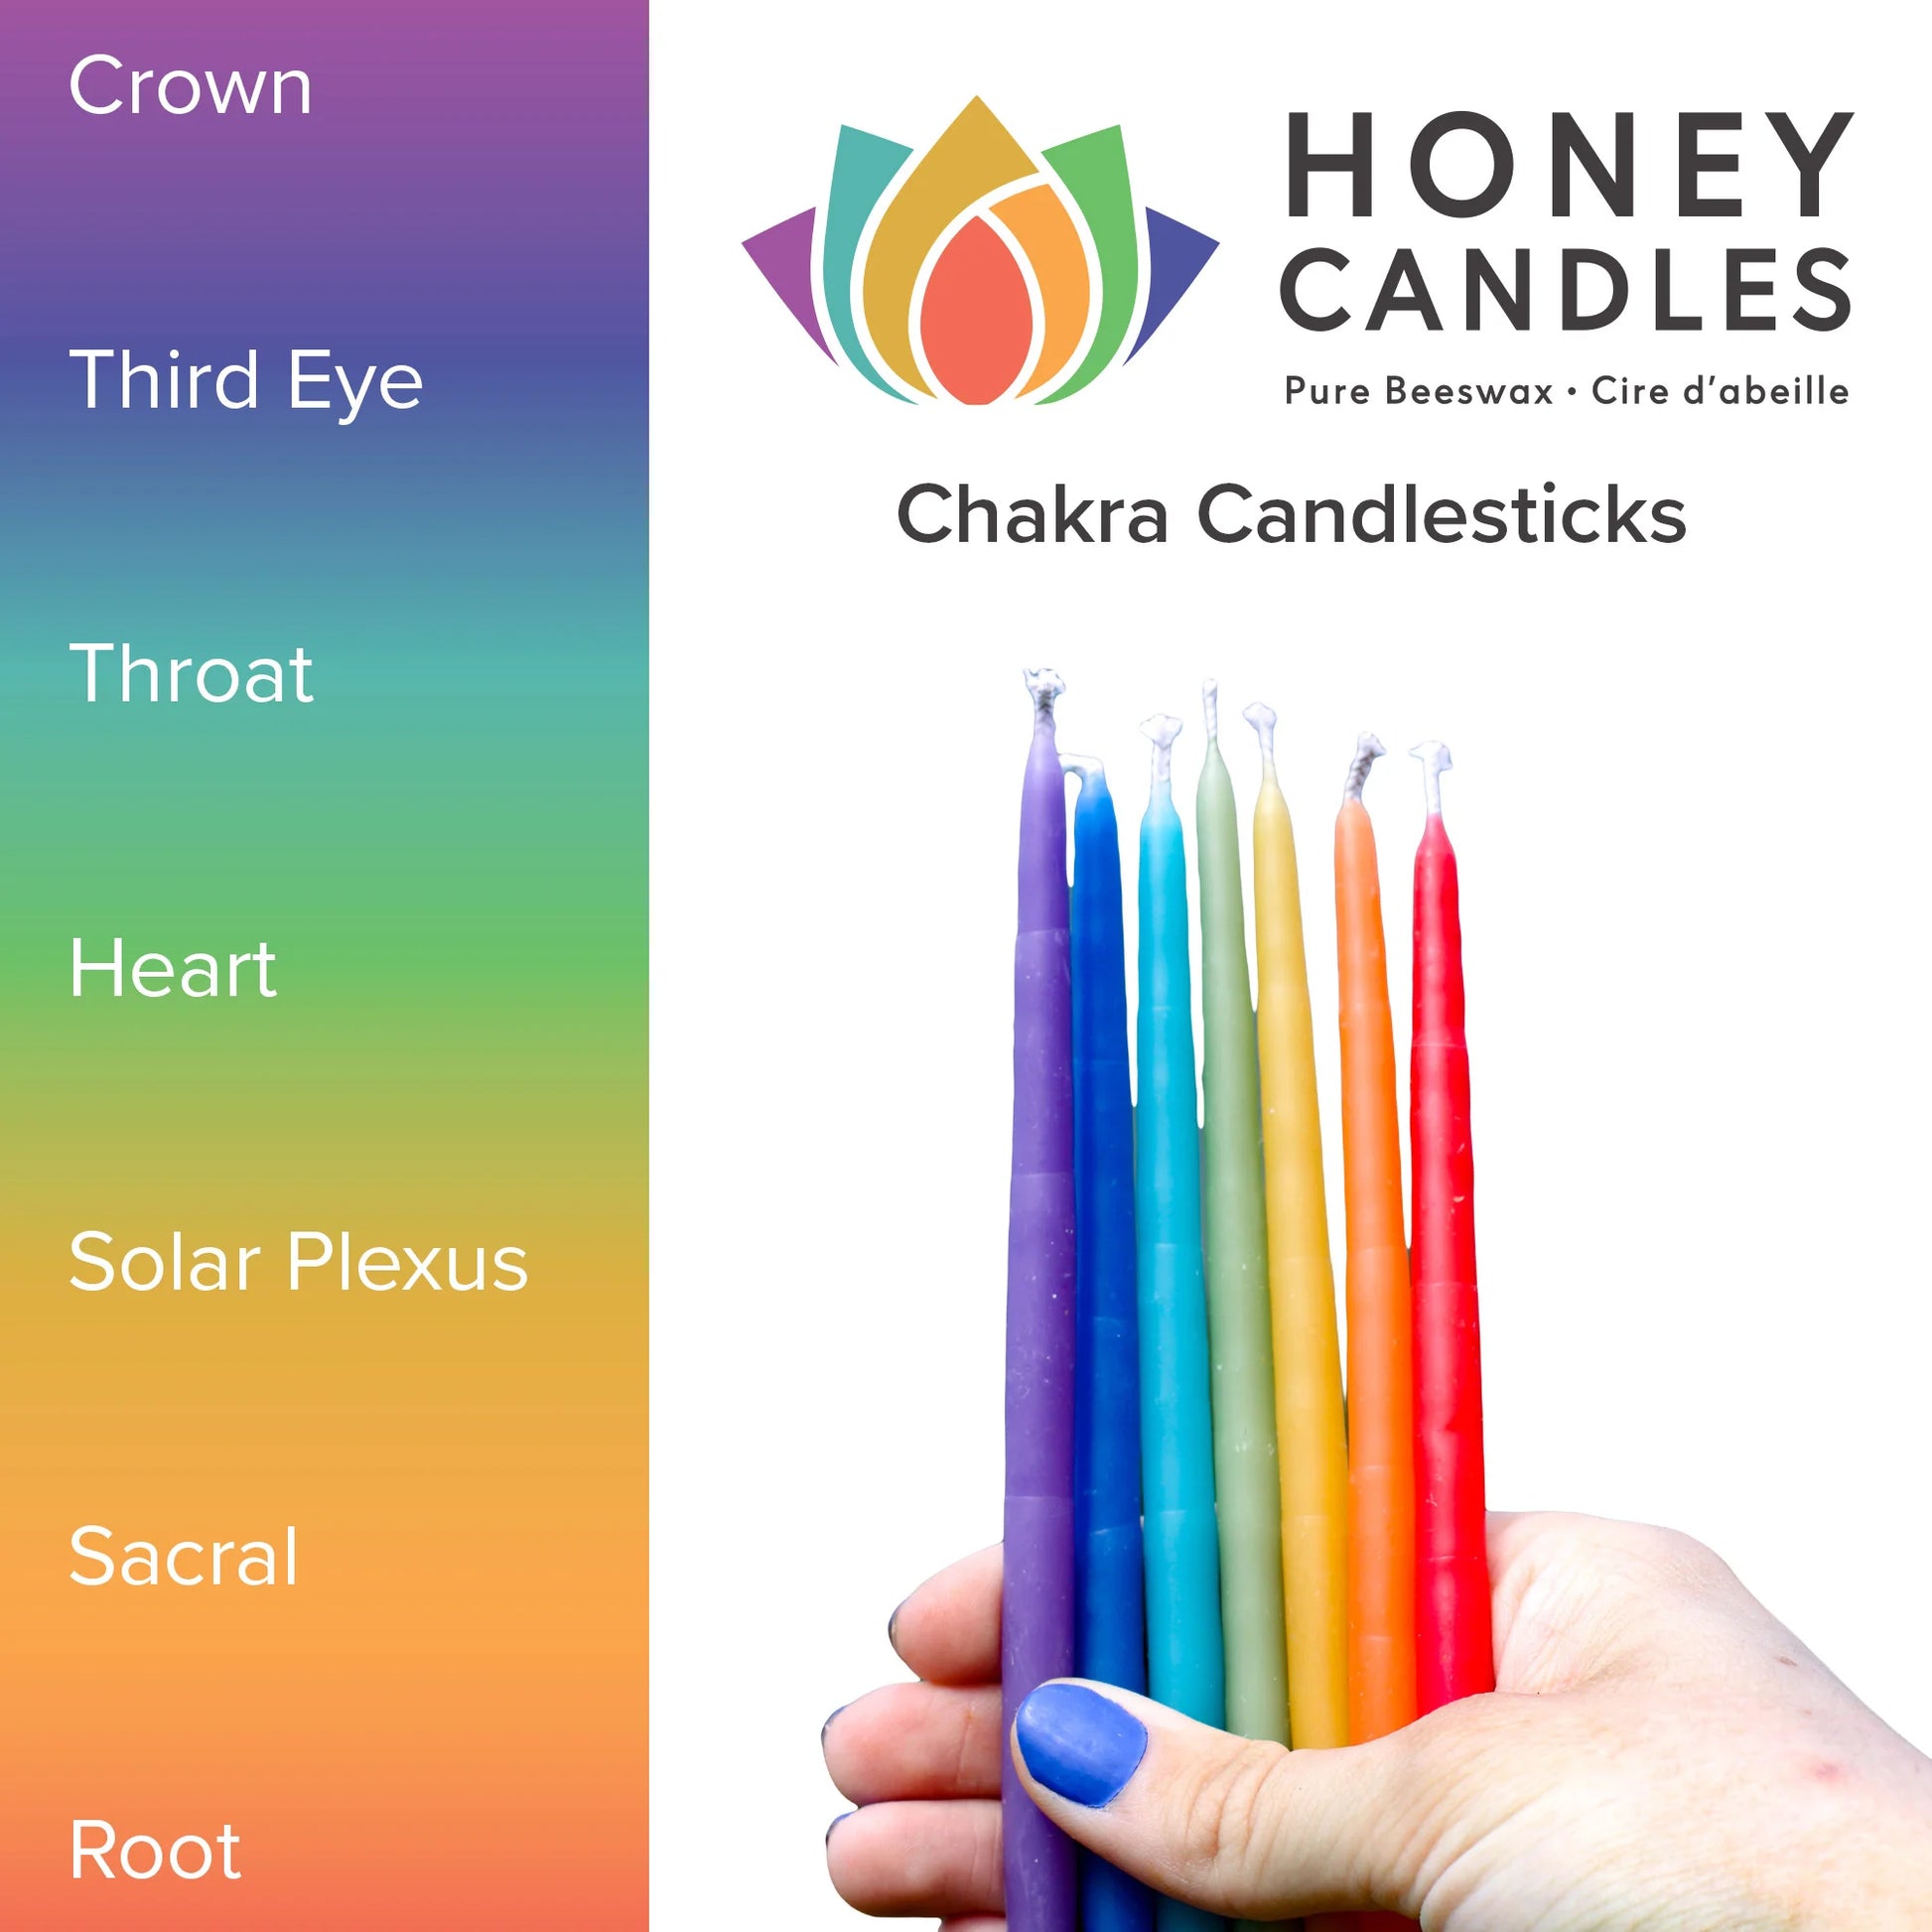 Honey Candles 7 Pack of Beeswax Chakra Candlesticks